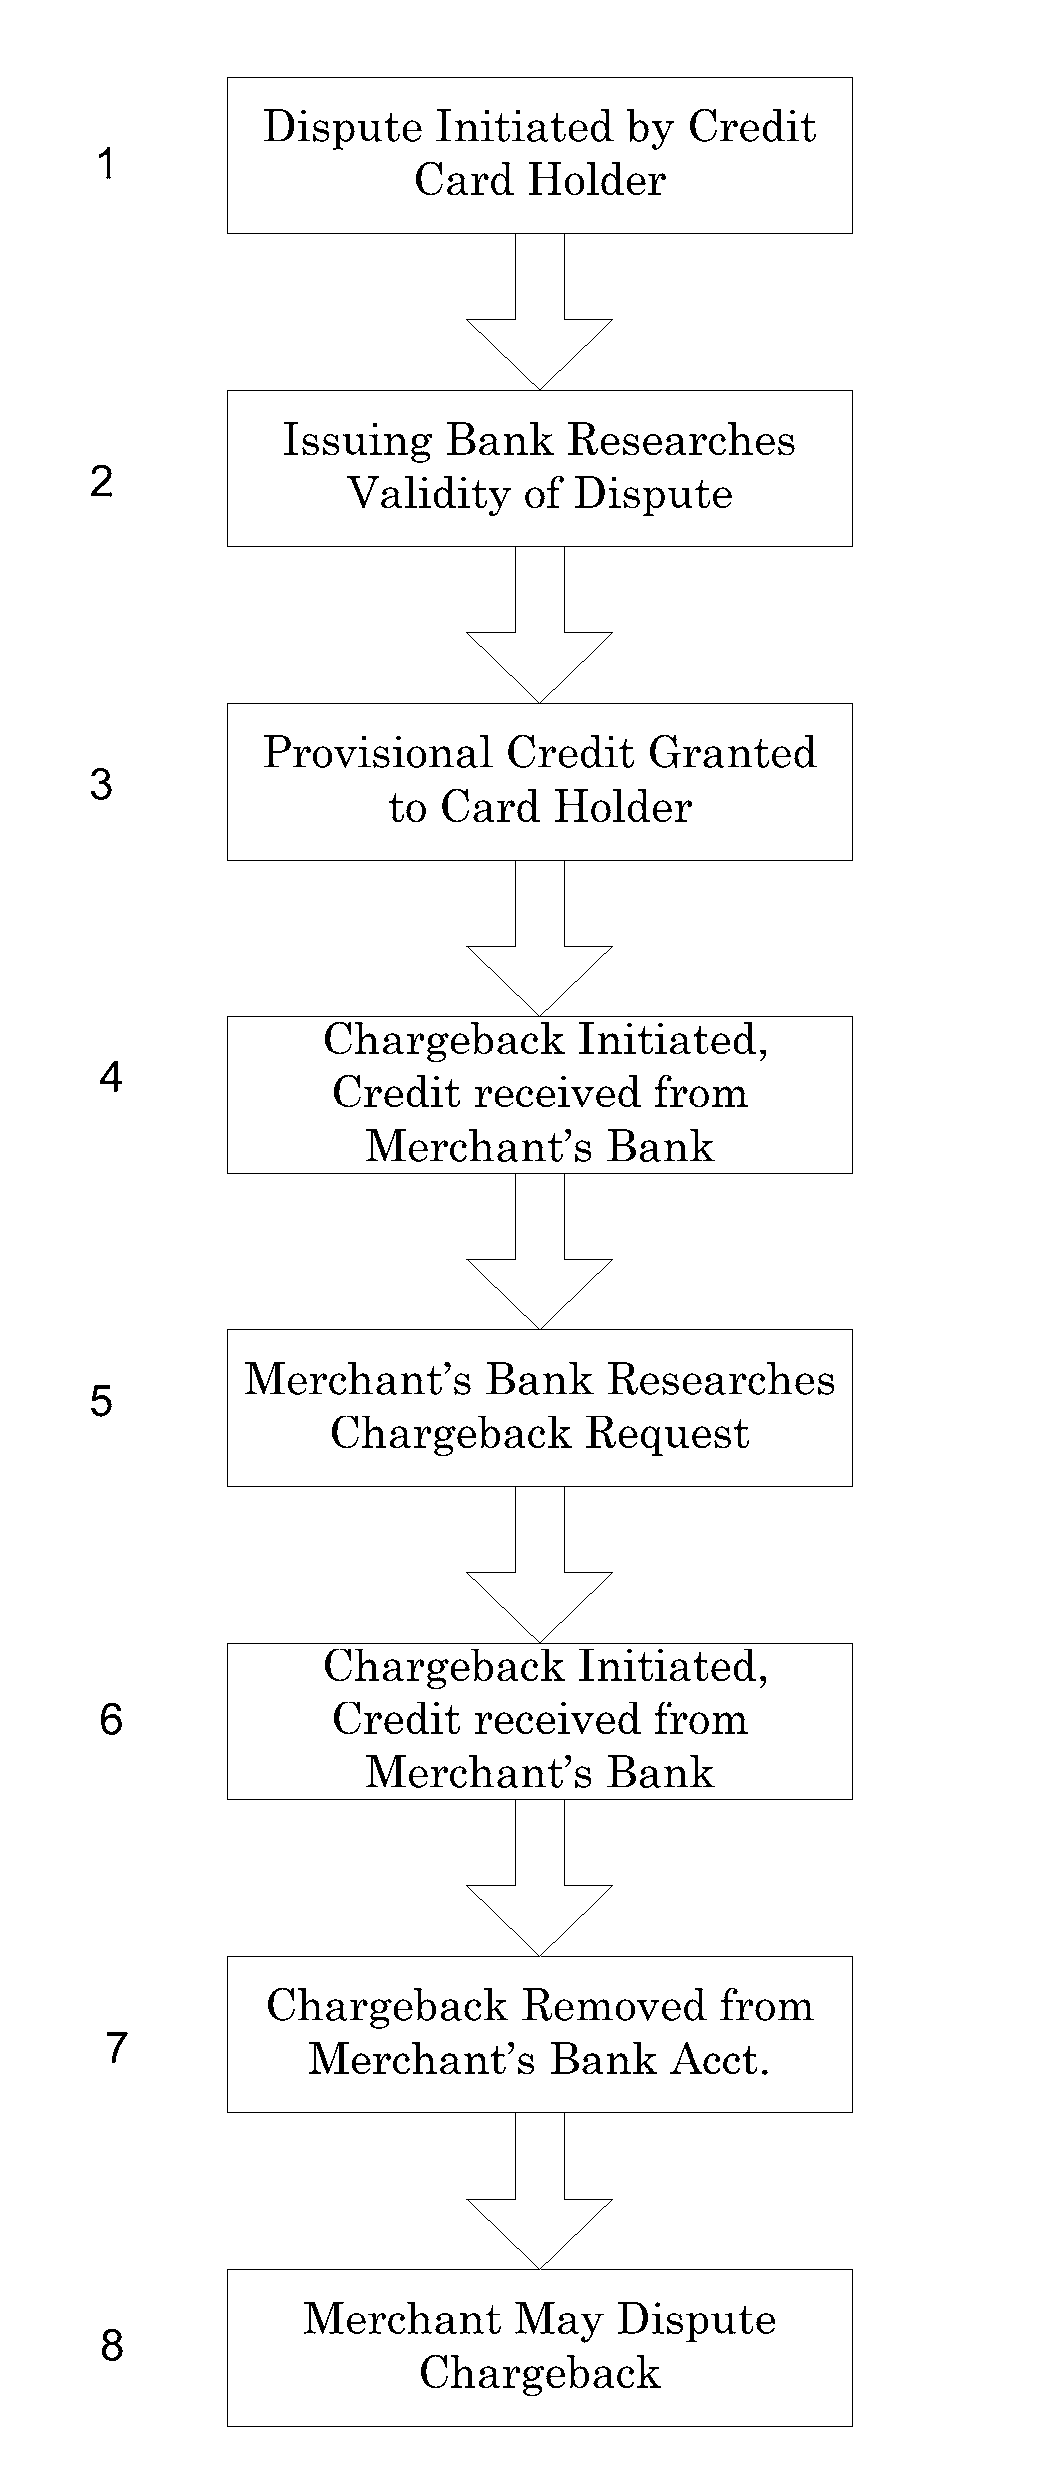 System and Method for Providing Dispute Resolution for Electronic Payment Transactions